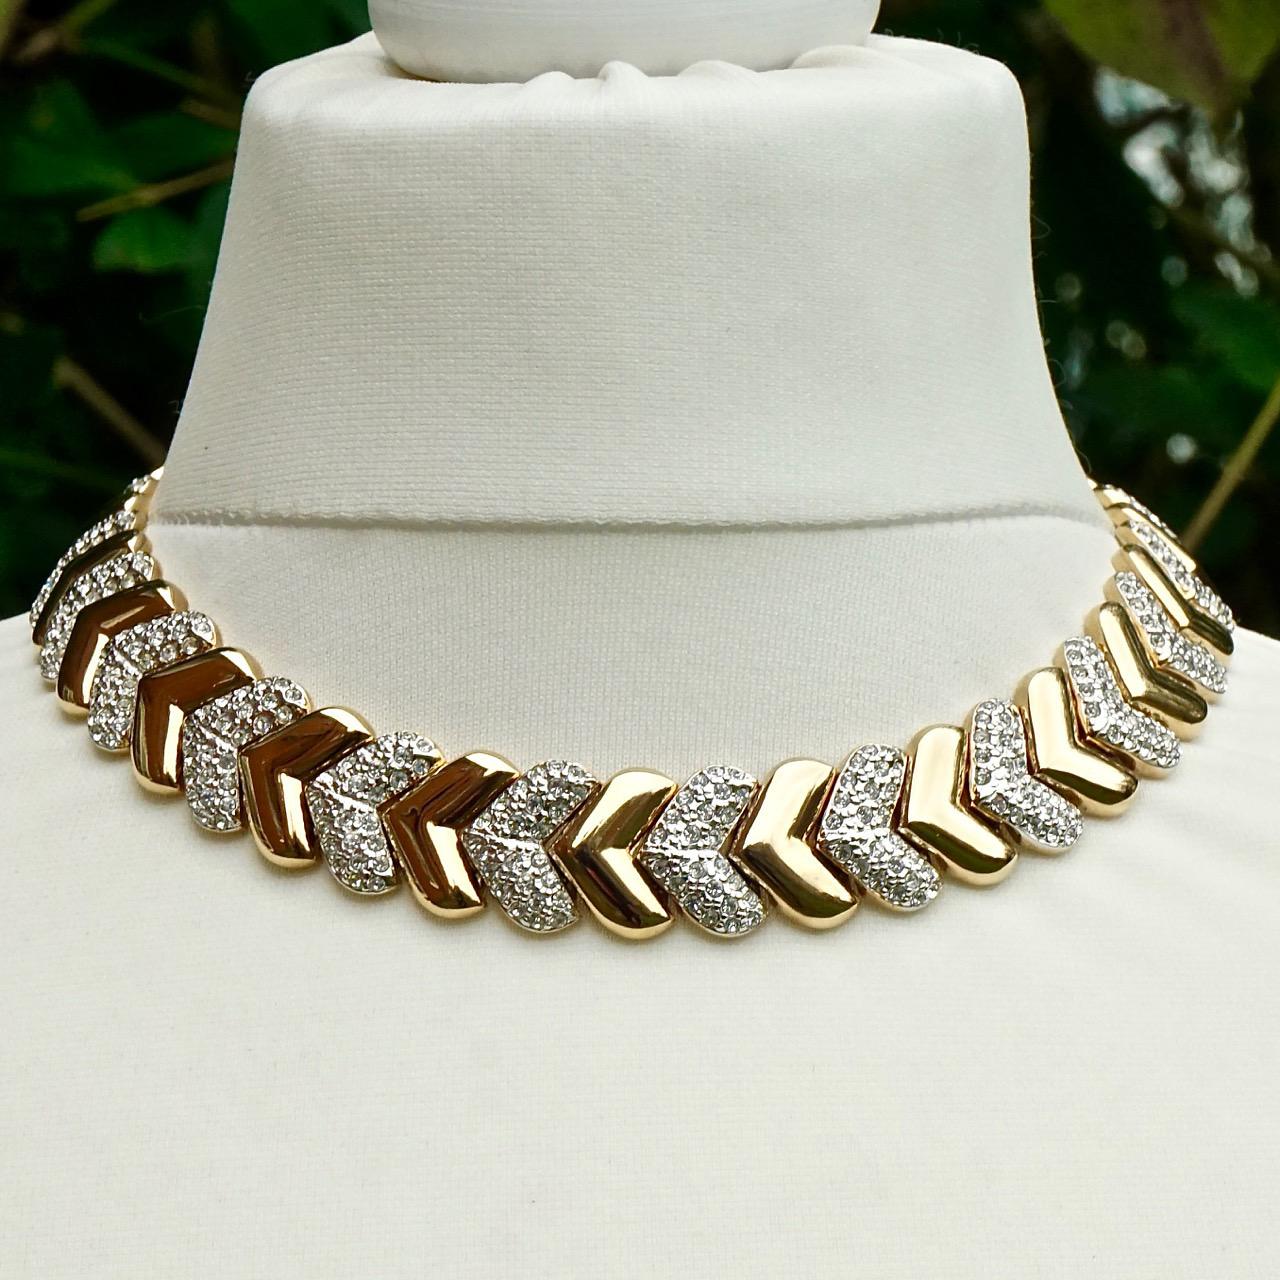 Gold Plated and Rhinestone Heavy Chevron Collar Necklace circa 1980s For Sale 3